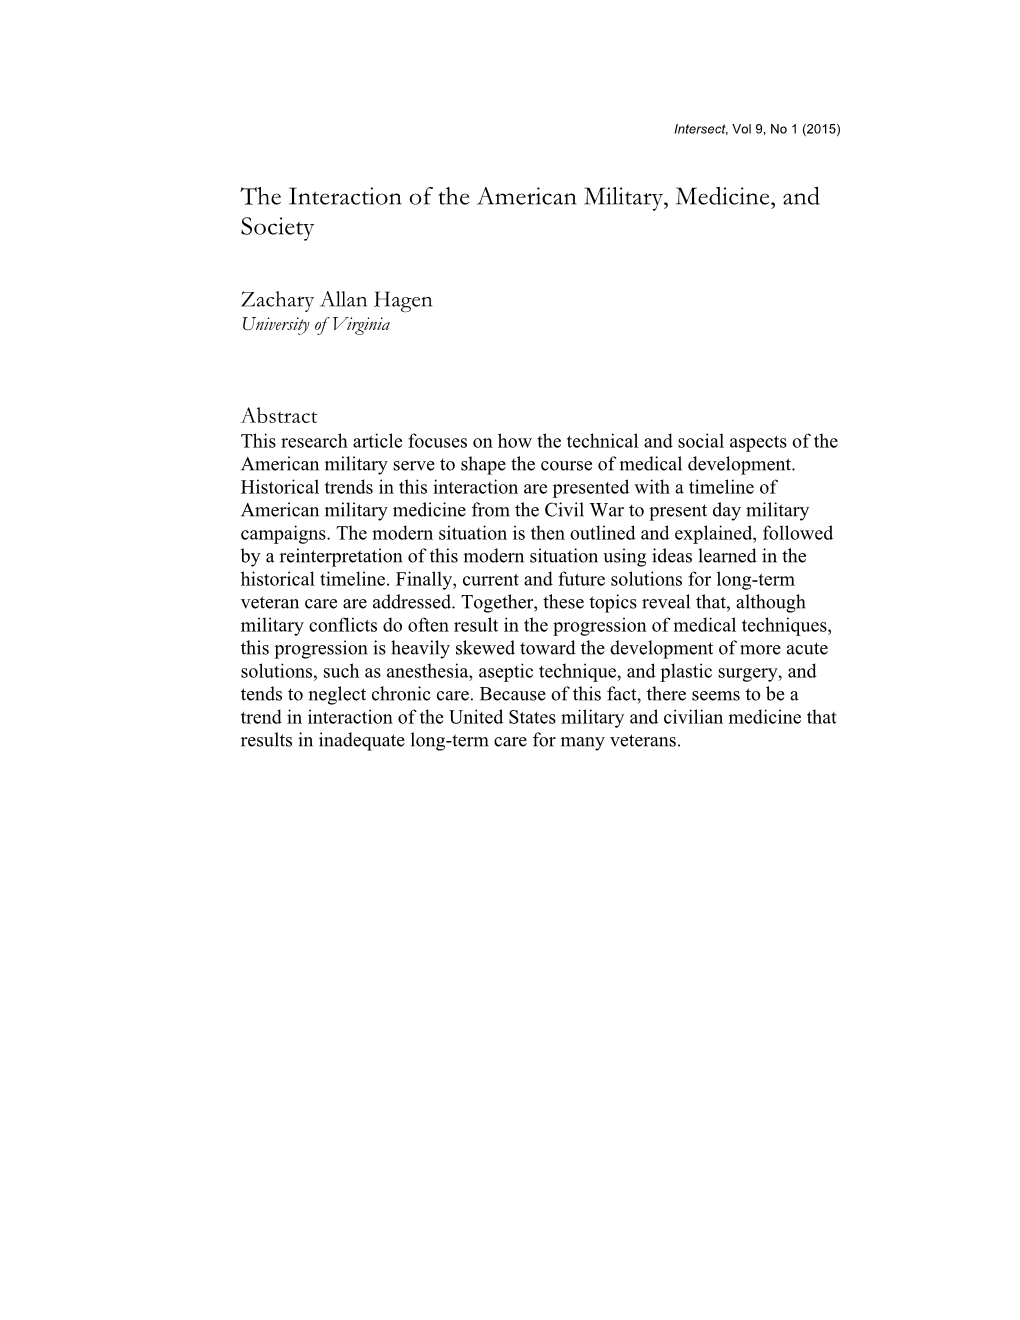 The Interaction of the American Military, Medicine, and Society